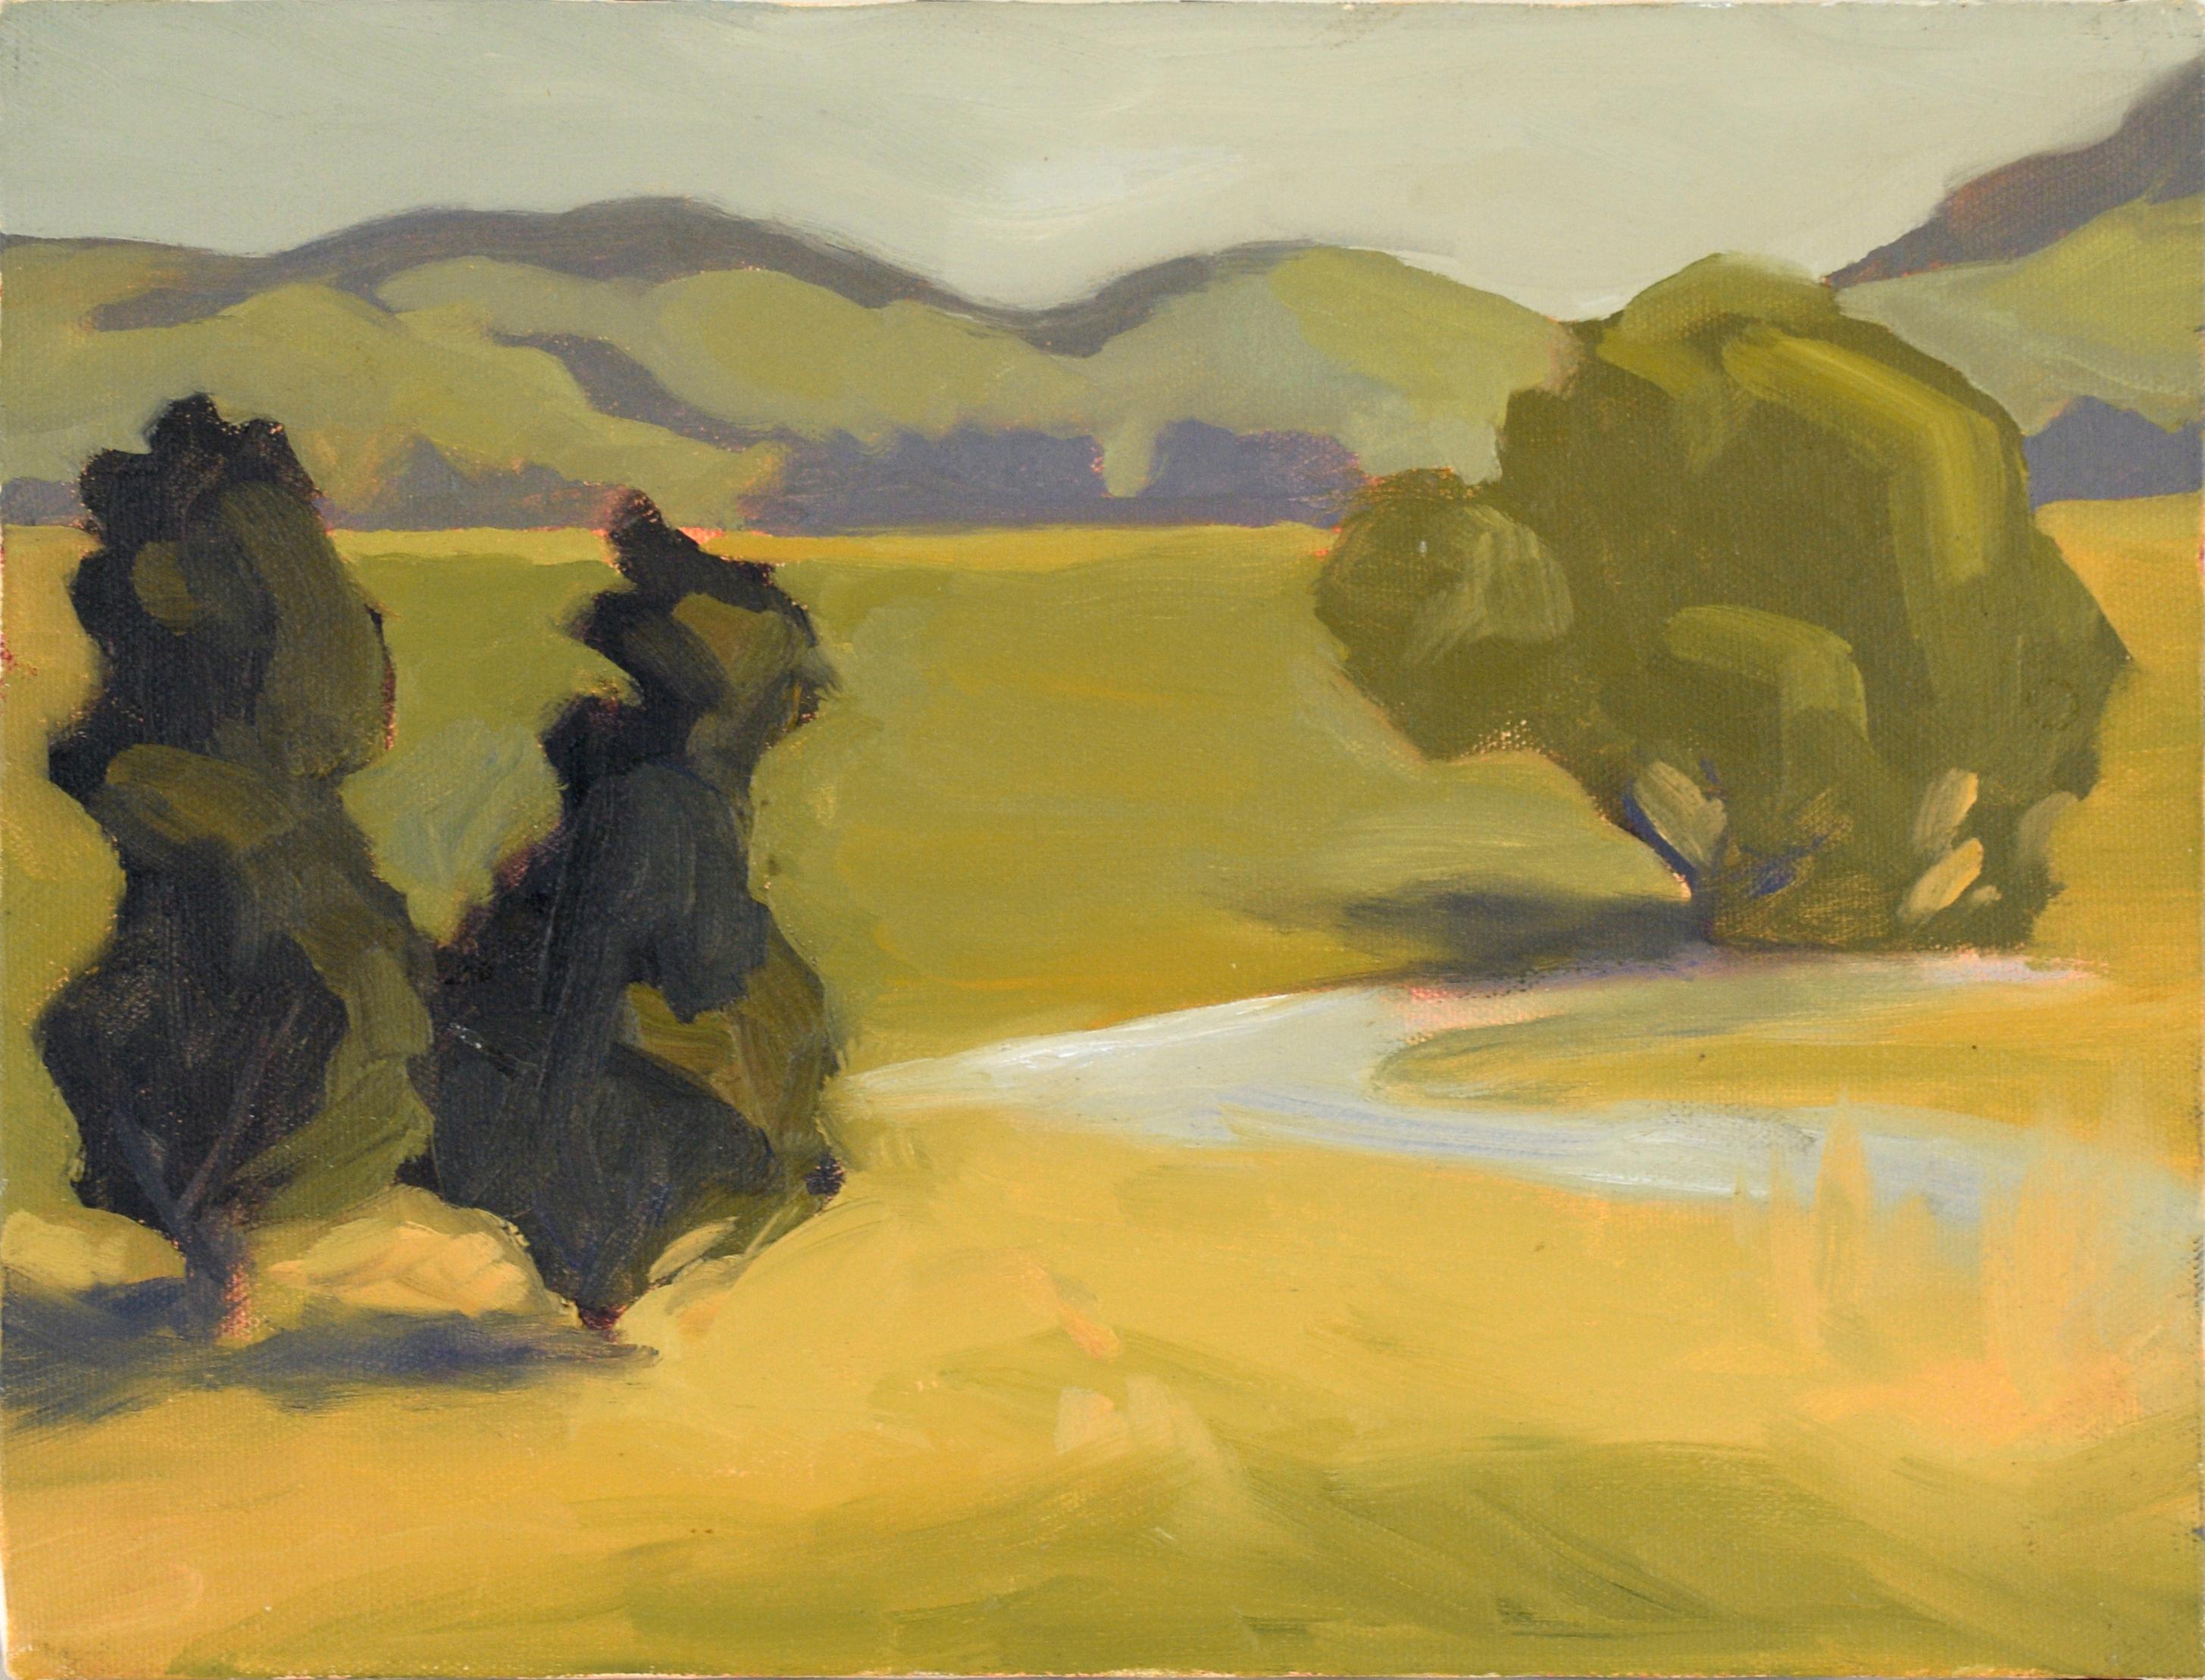 Mary Howard Landscape Painting - Olompali State Park, Marin County, CA - Plein Air Landscape in Oil on Canvas